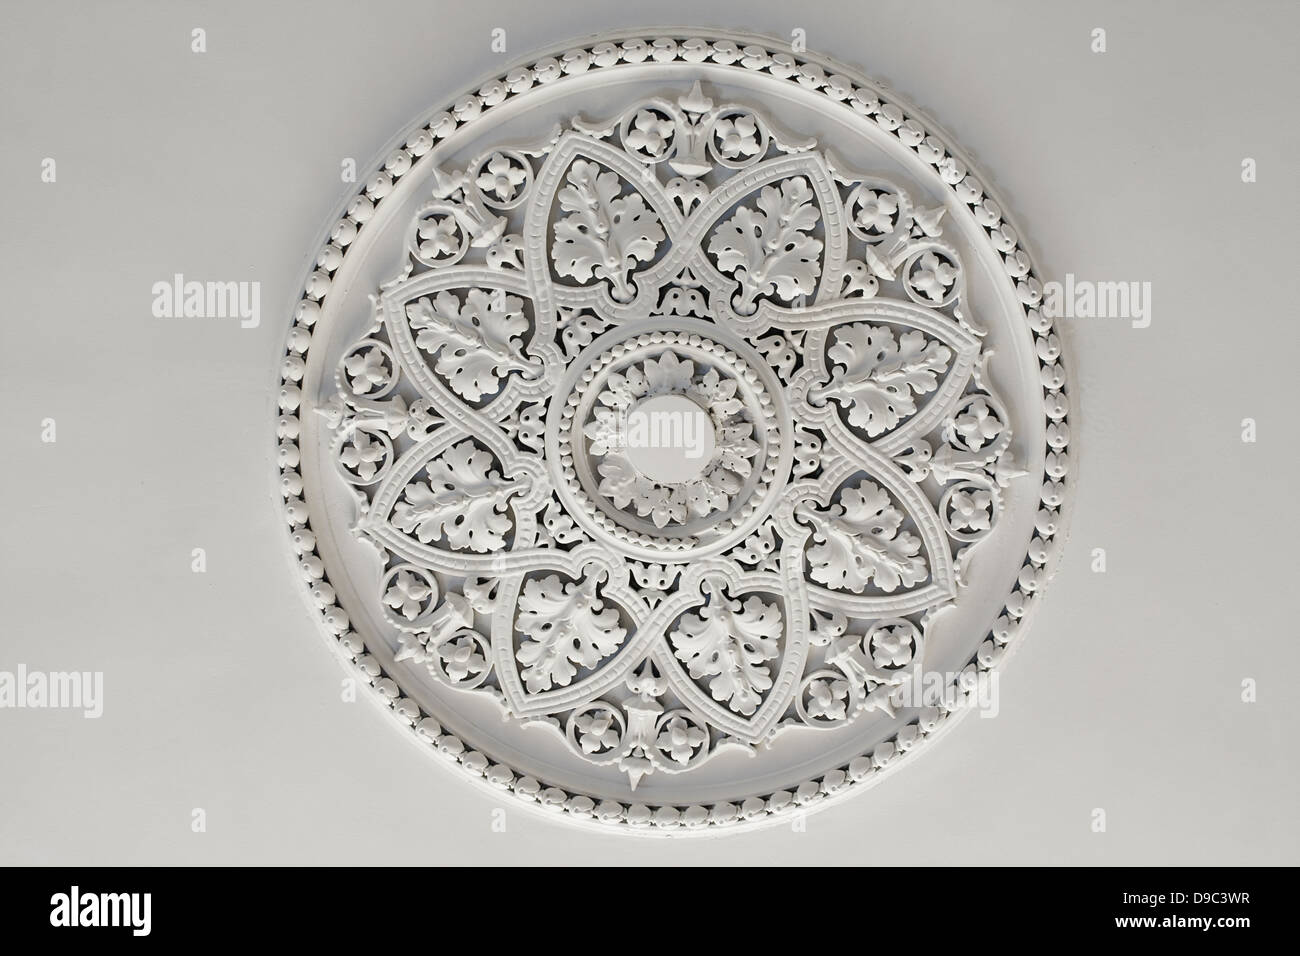 Old antique plaster ceiling plate or rose in an old victorian house Stock Photo